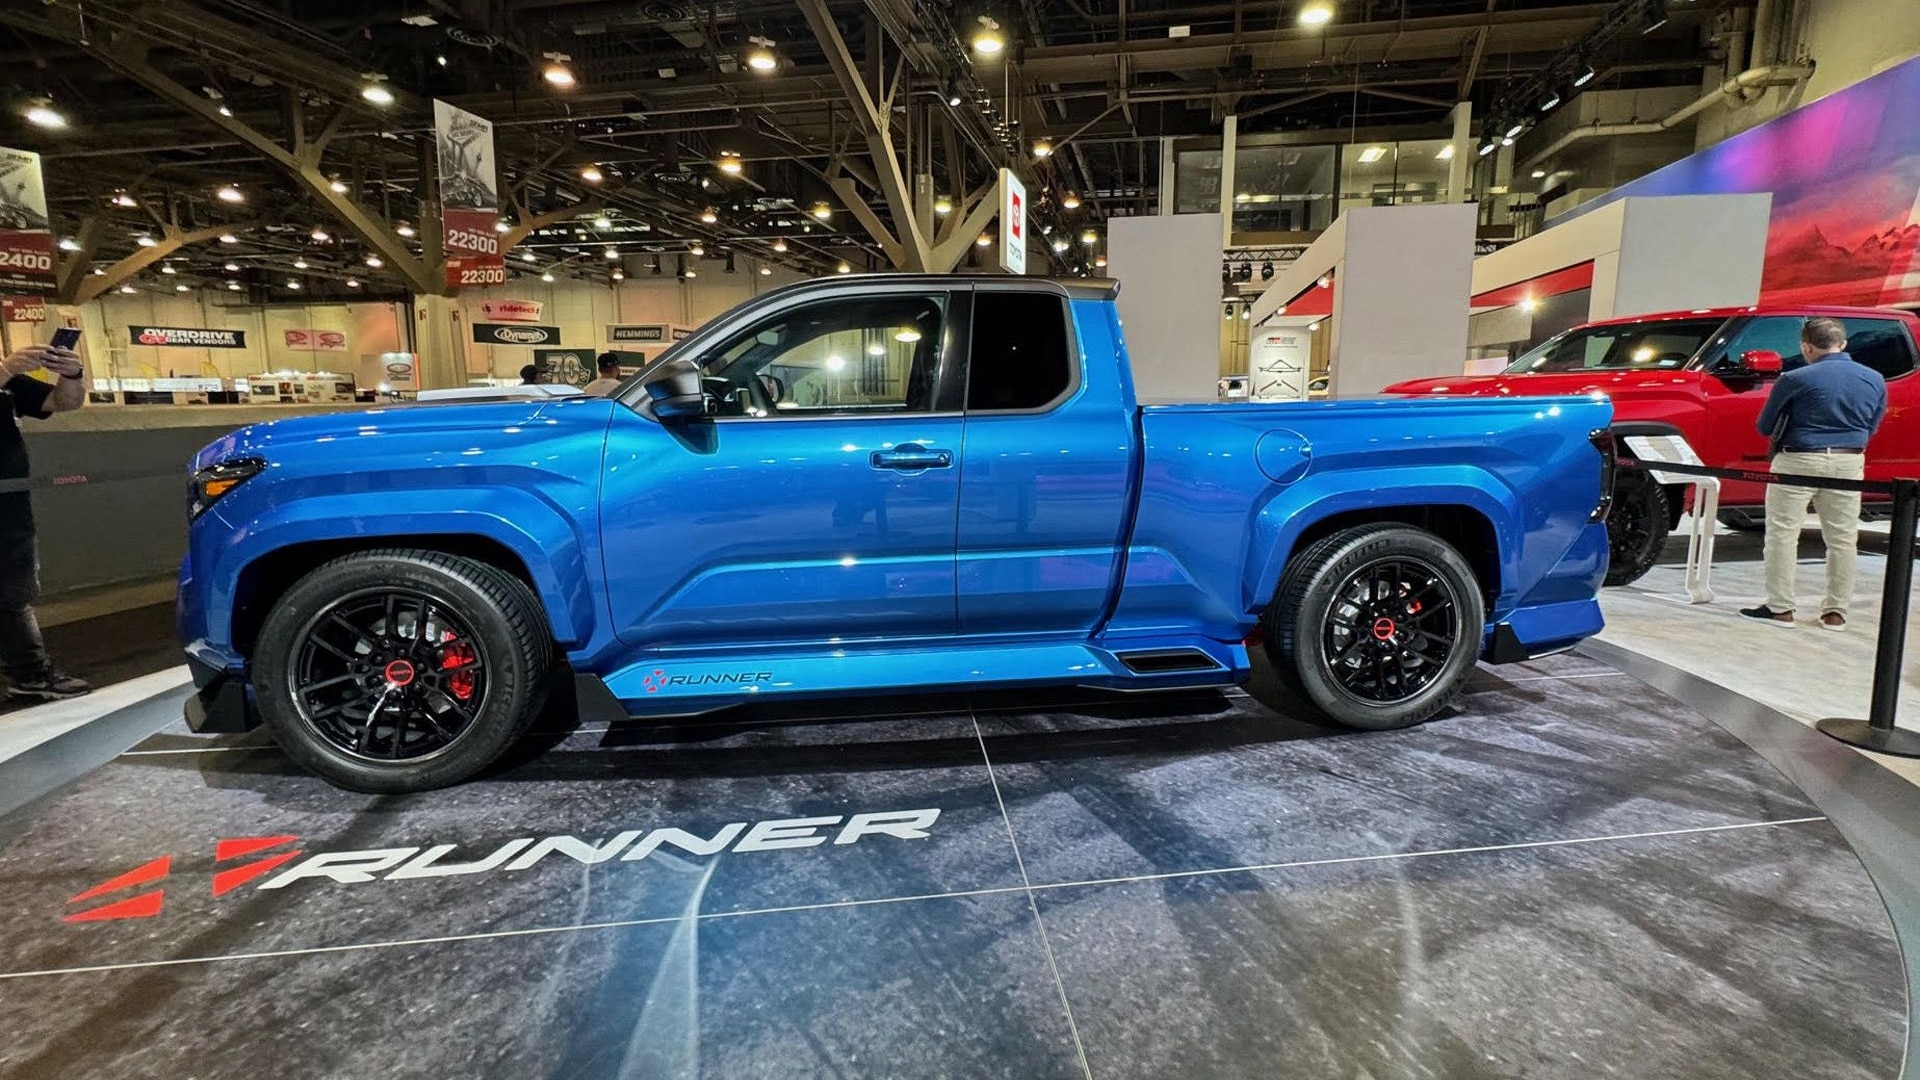 Toyota XRunner is a street truck with twinturbo V6